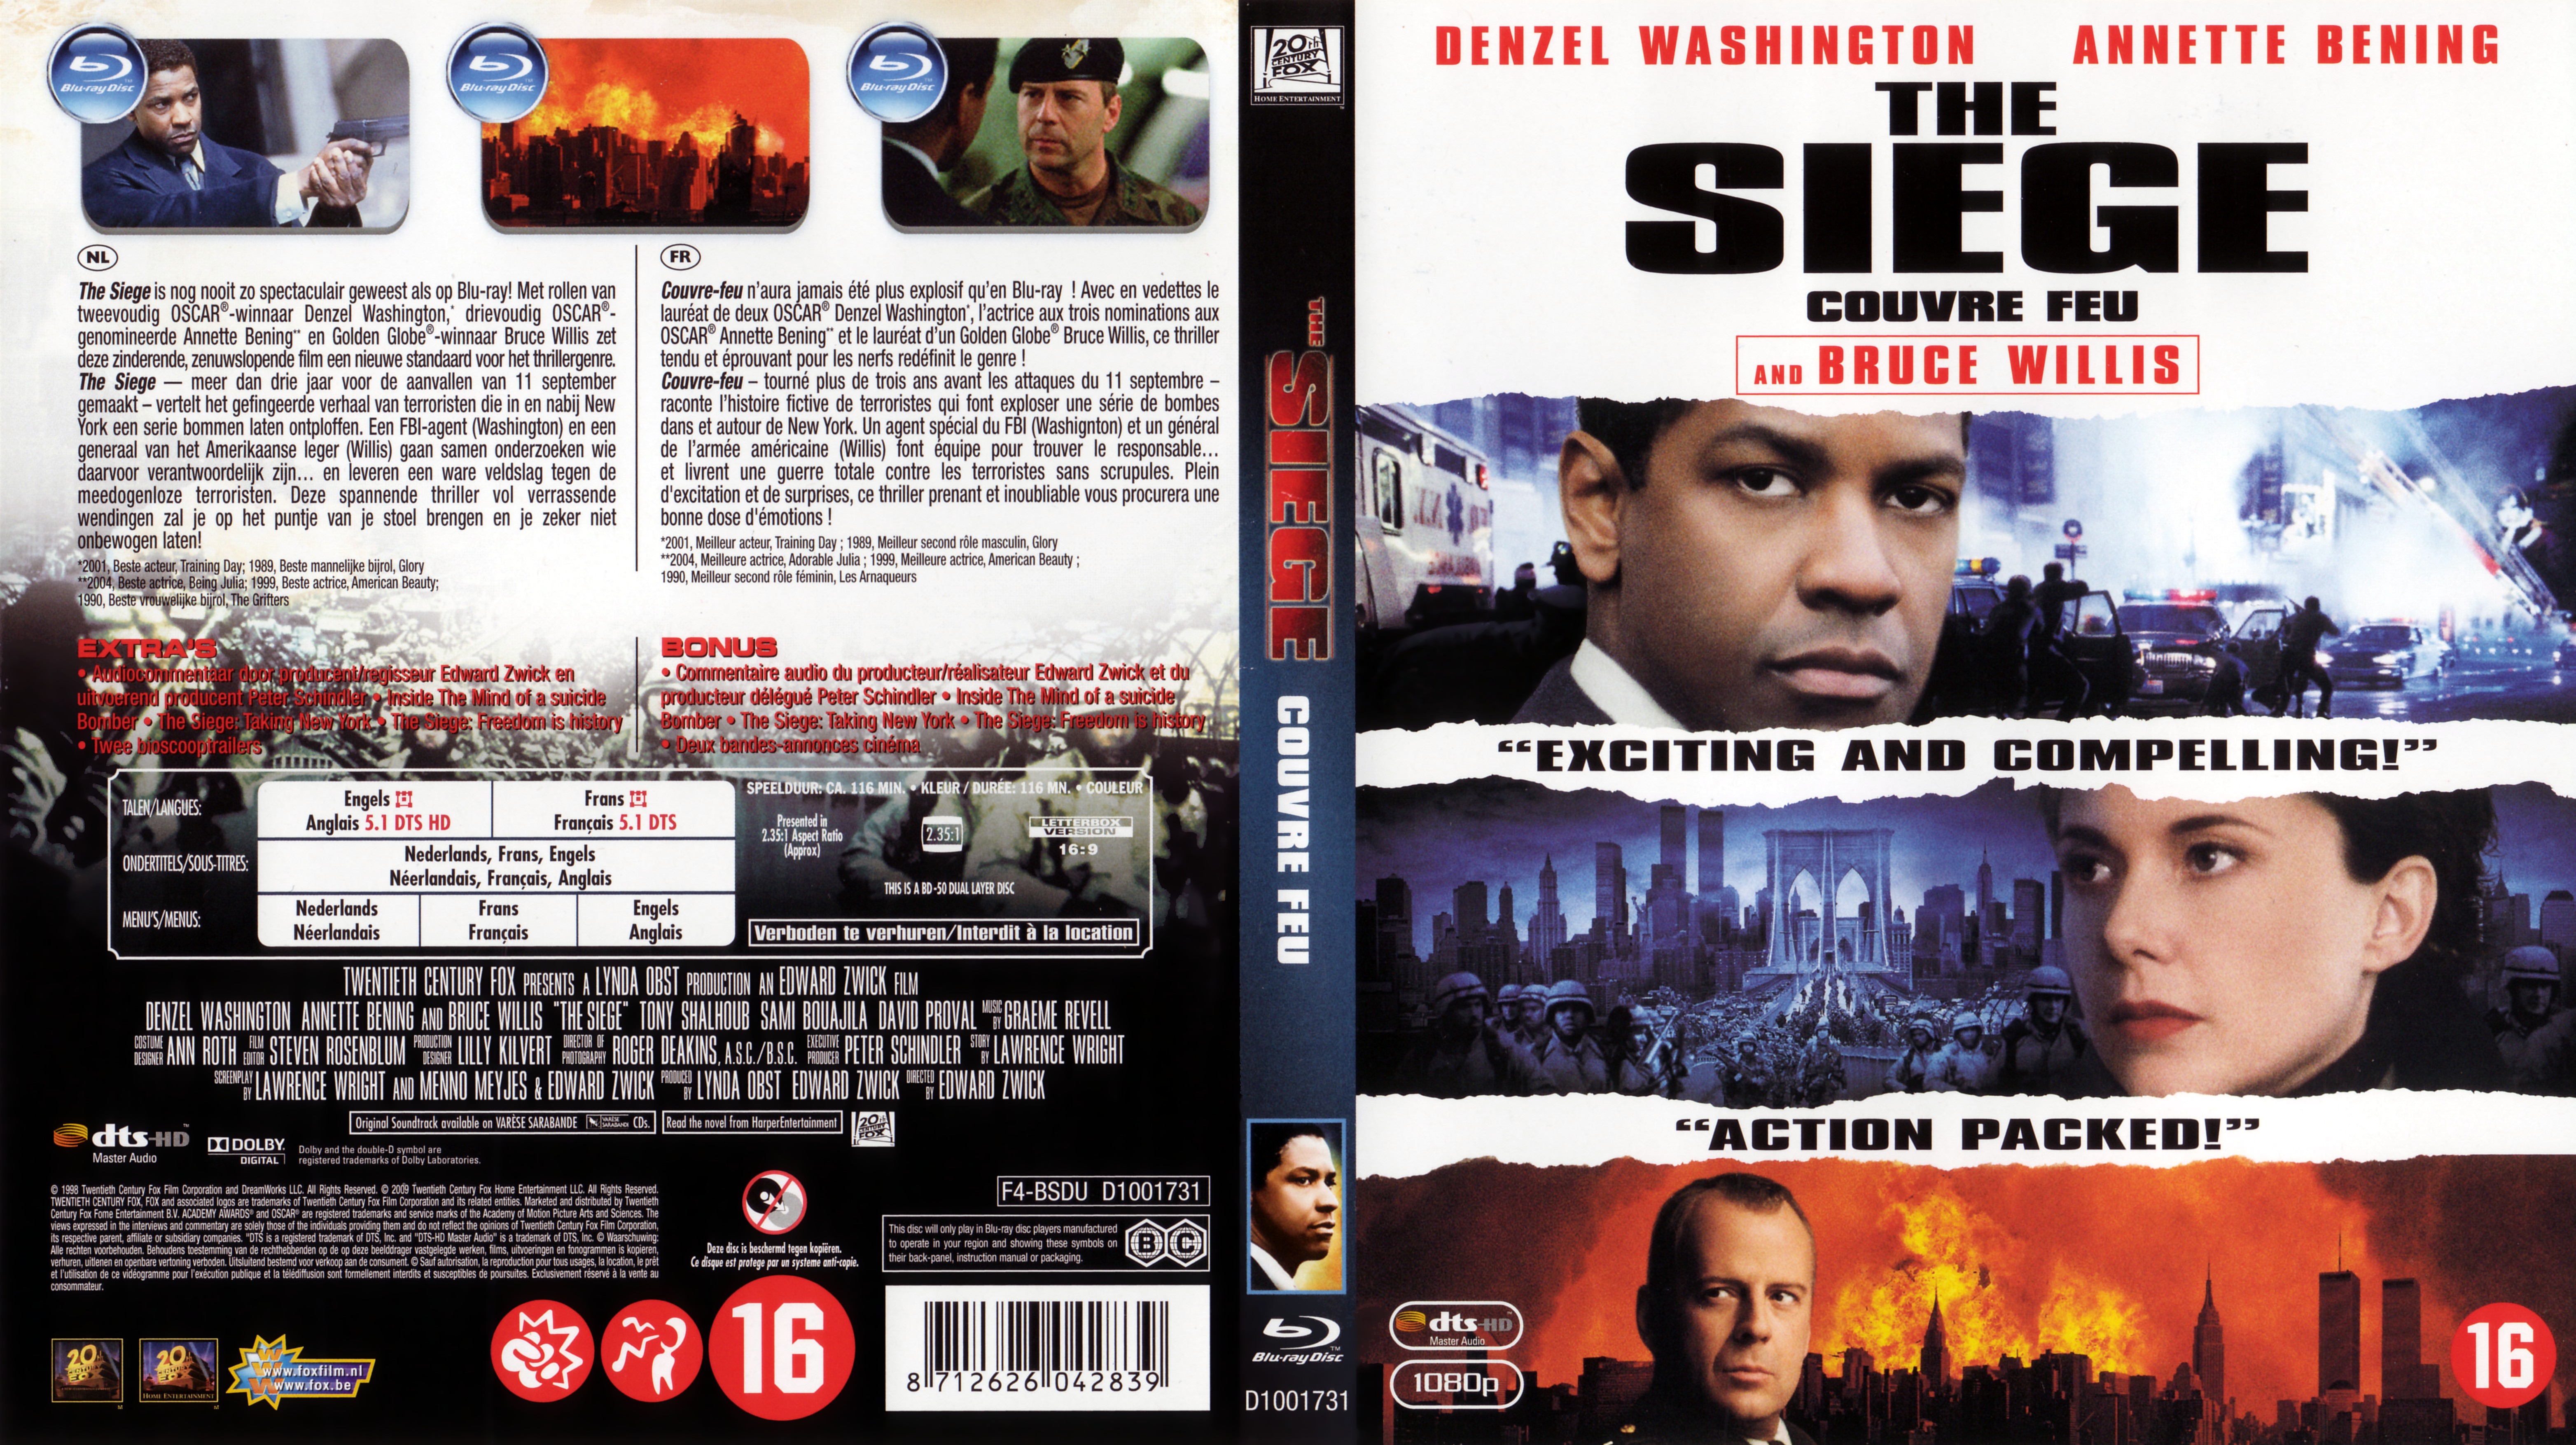 Jaquette DVD The siege - Couvre-feu (BLU-RAY)